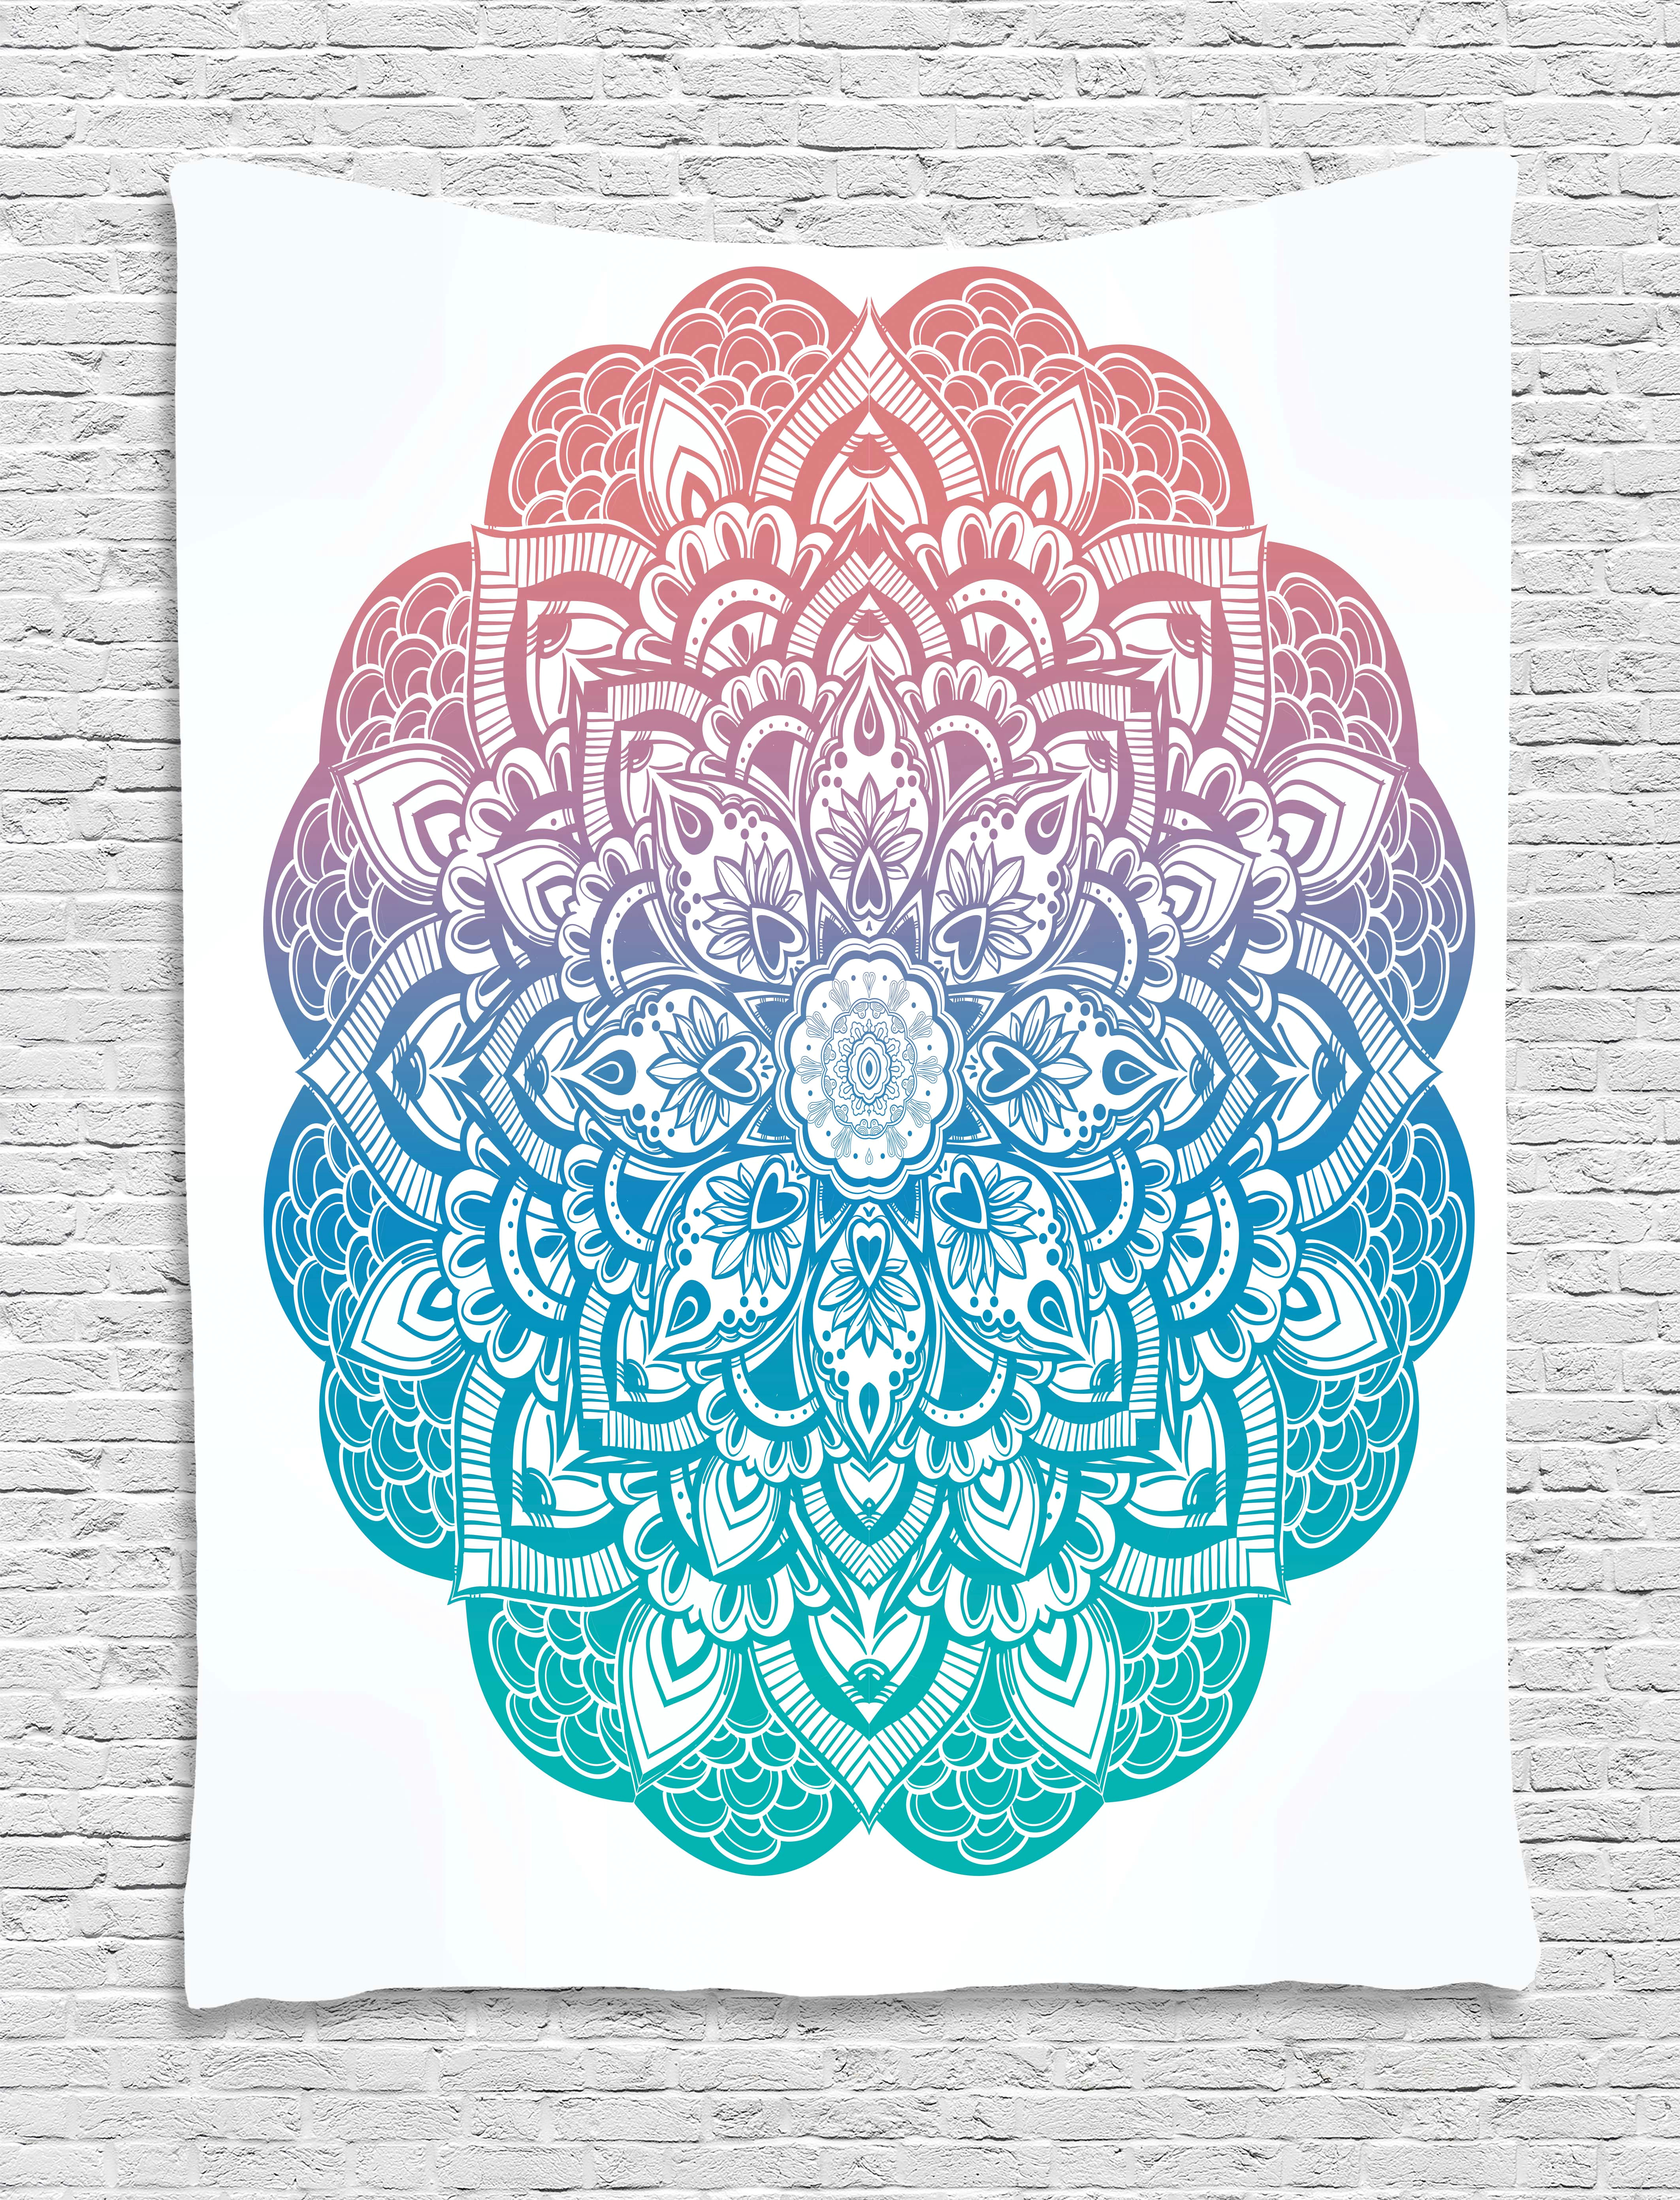 Drawing A Mystic Rose Yoga Tapestry Boho Gypsy Mandala In Pastel Colors Mystic Floral